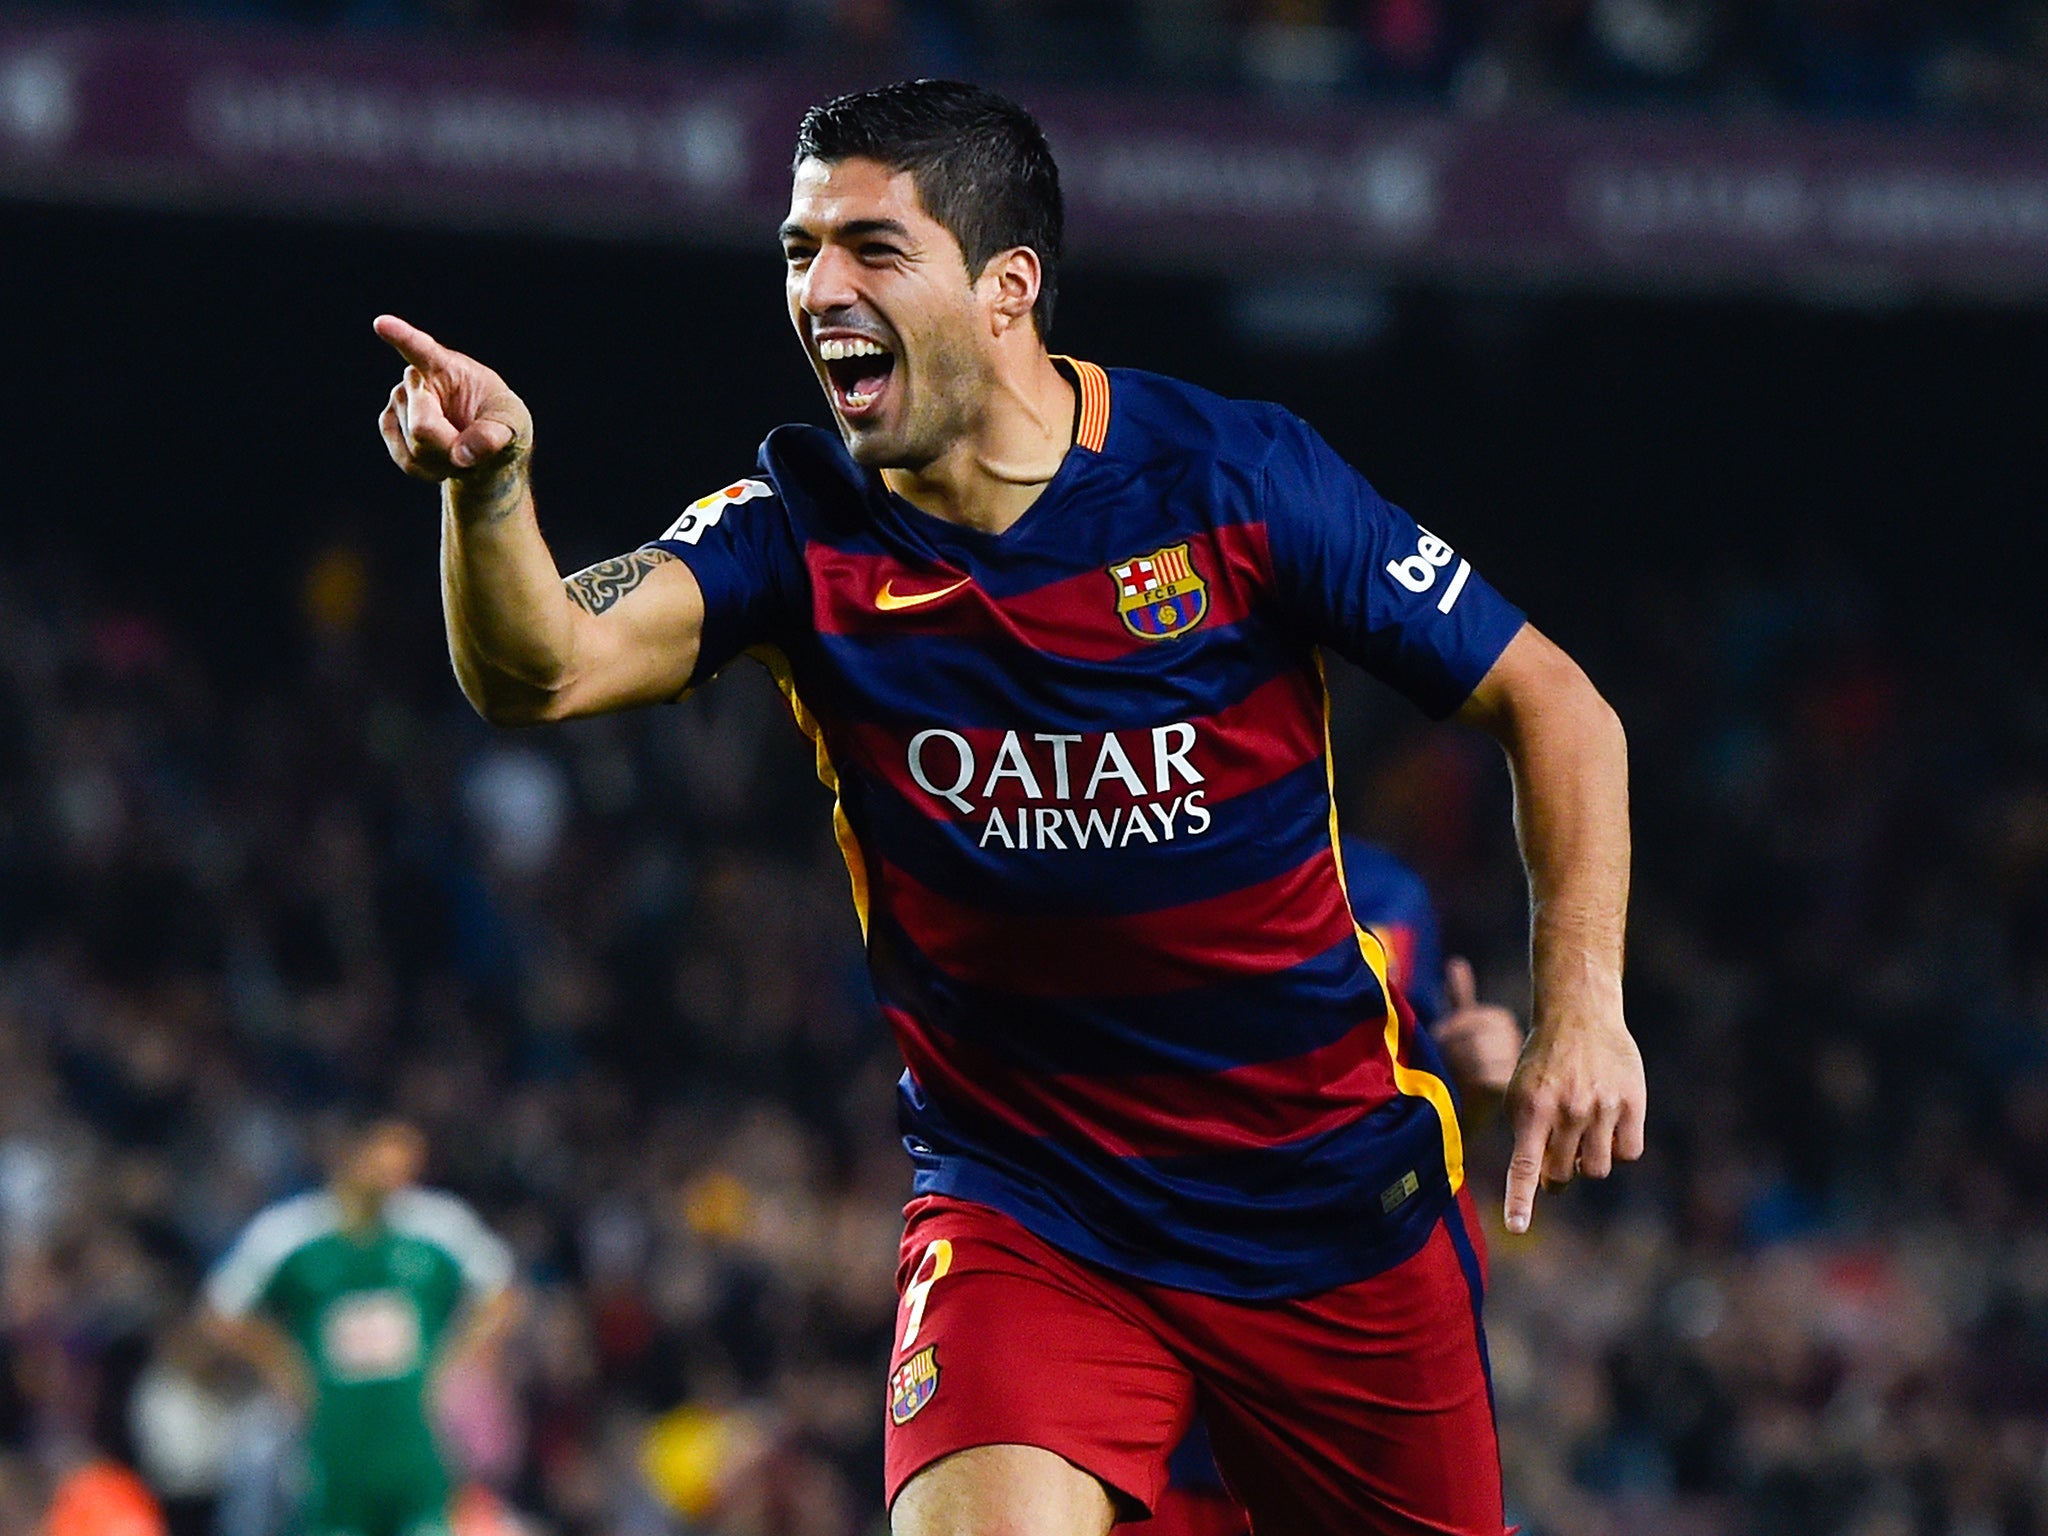 Luis Suarez has scored 61 goals in 77 games for Barcelona (Getty)